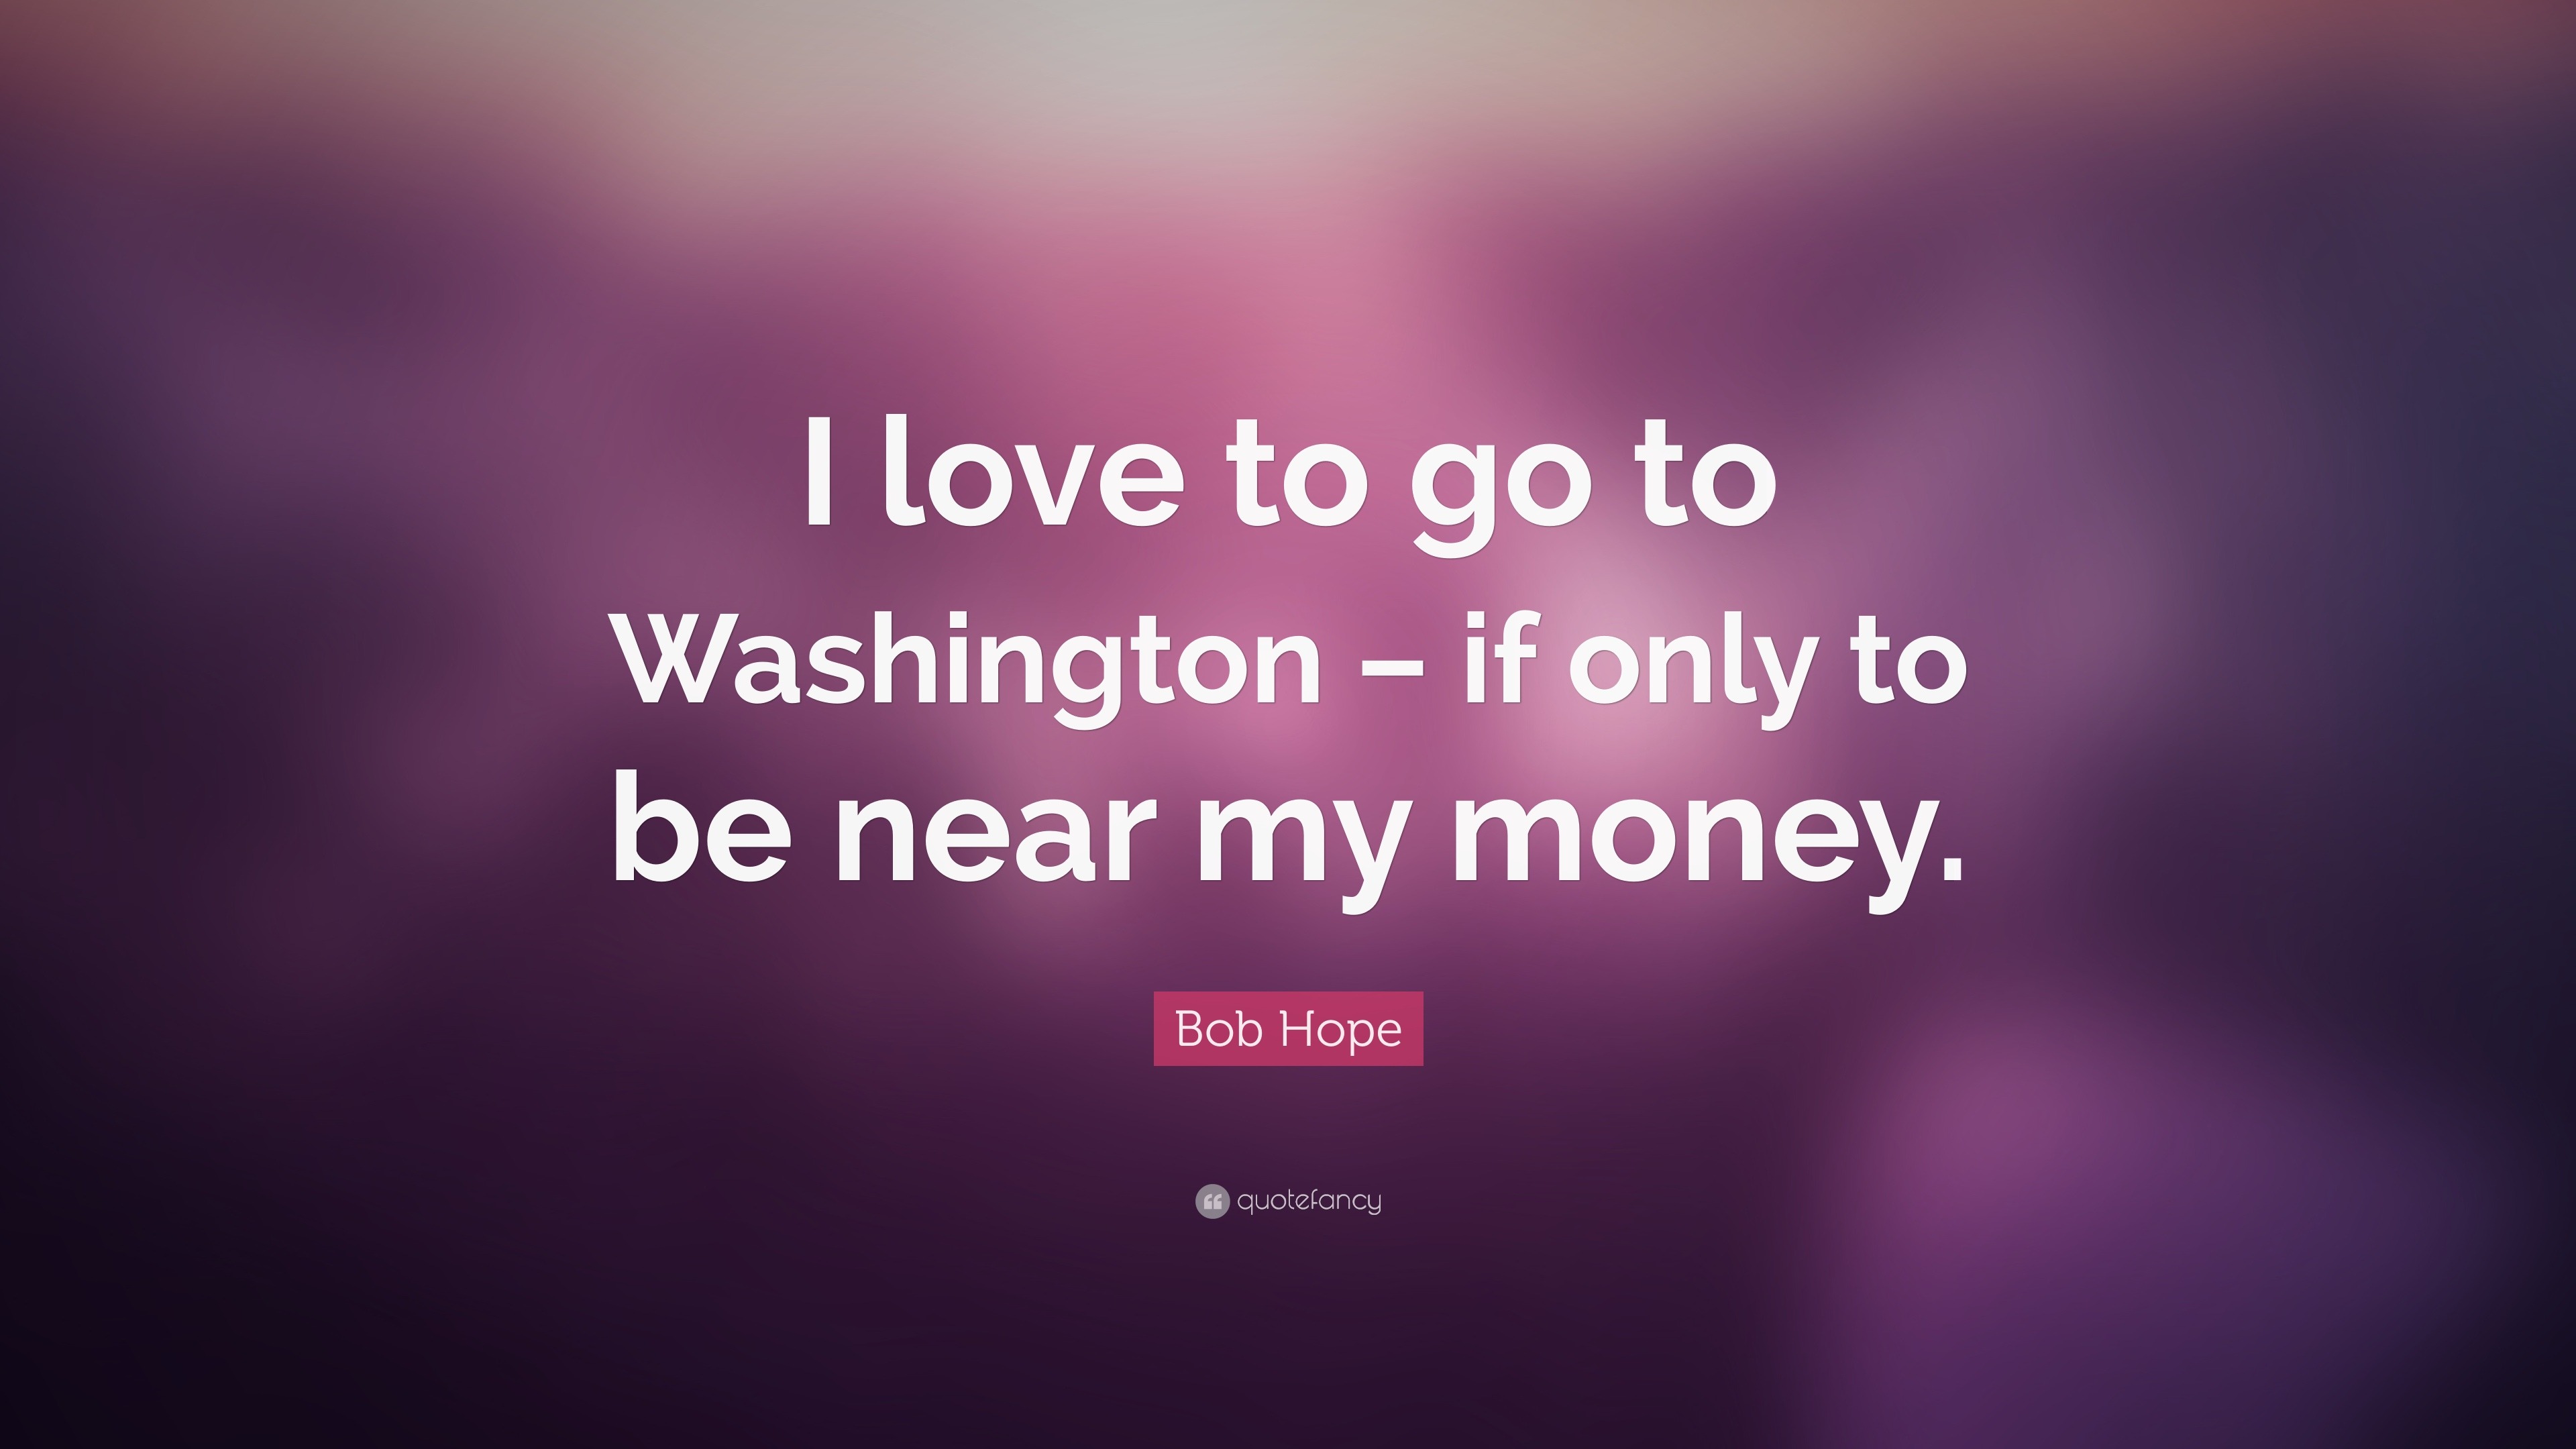 https://quotefancy.com/media/wallpaper/3840x2160/1903905-Bob-Hope-Quote-I-love-to-go-to-Washington-if-only-to-be-near-my.jpg